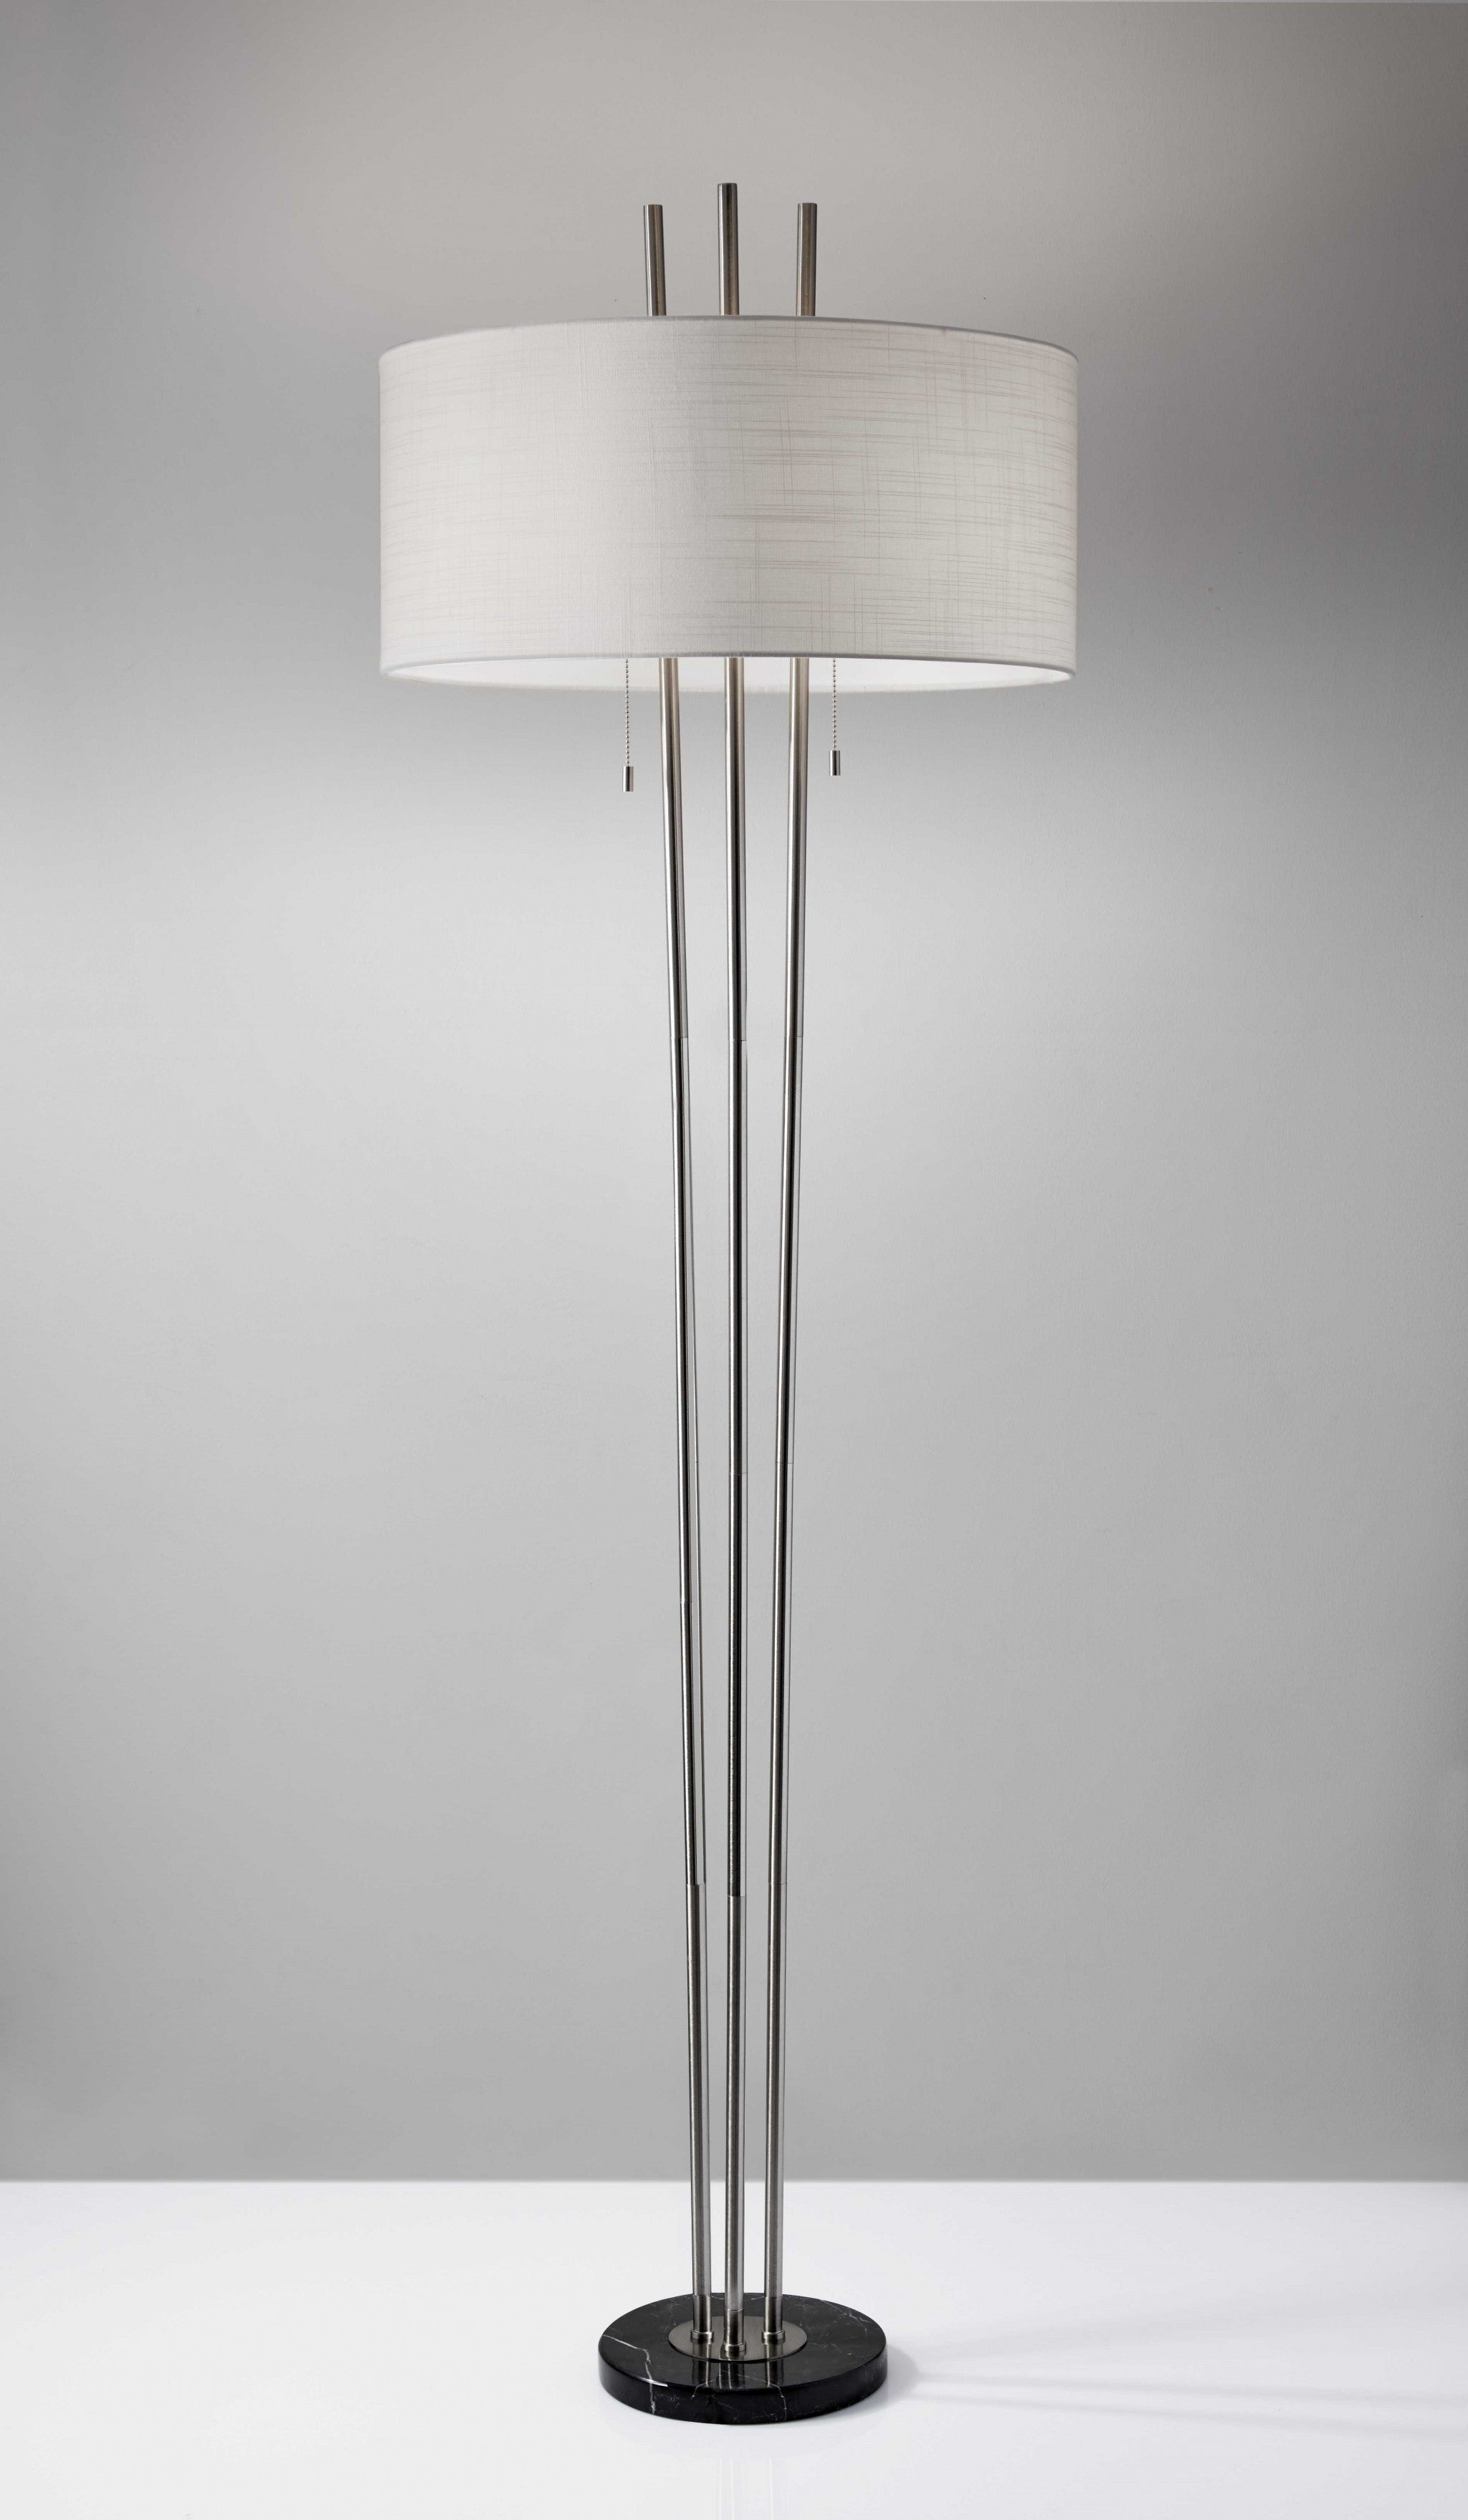 71" Two Light Traditional Shaped Floor Lamp With White Drum Shade